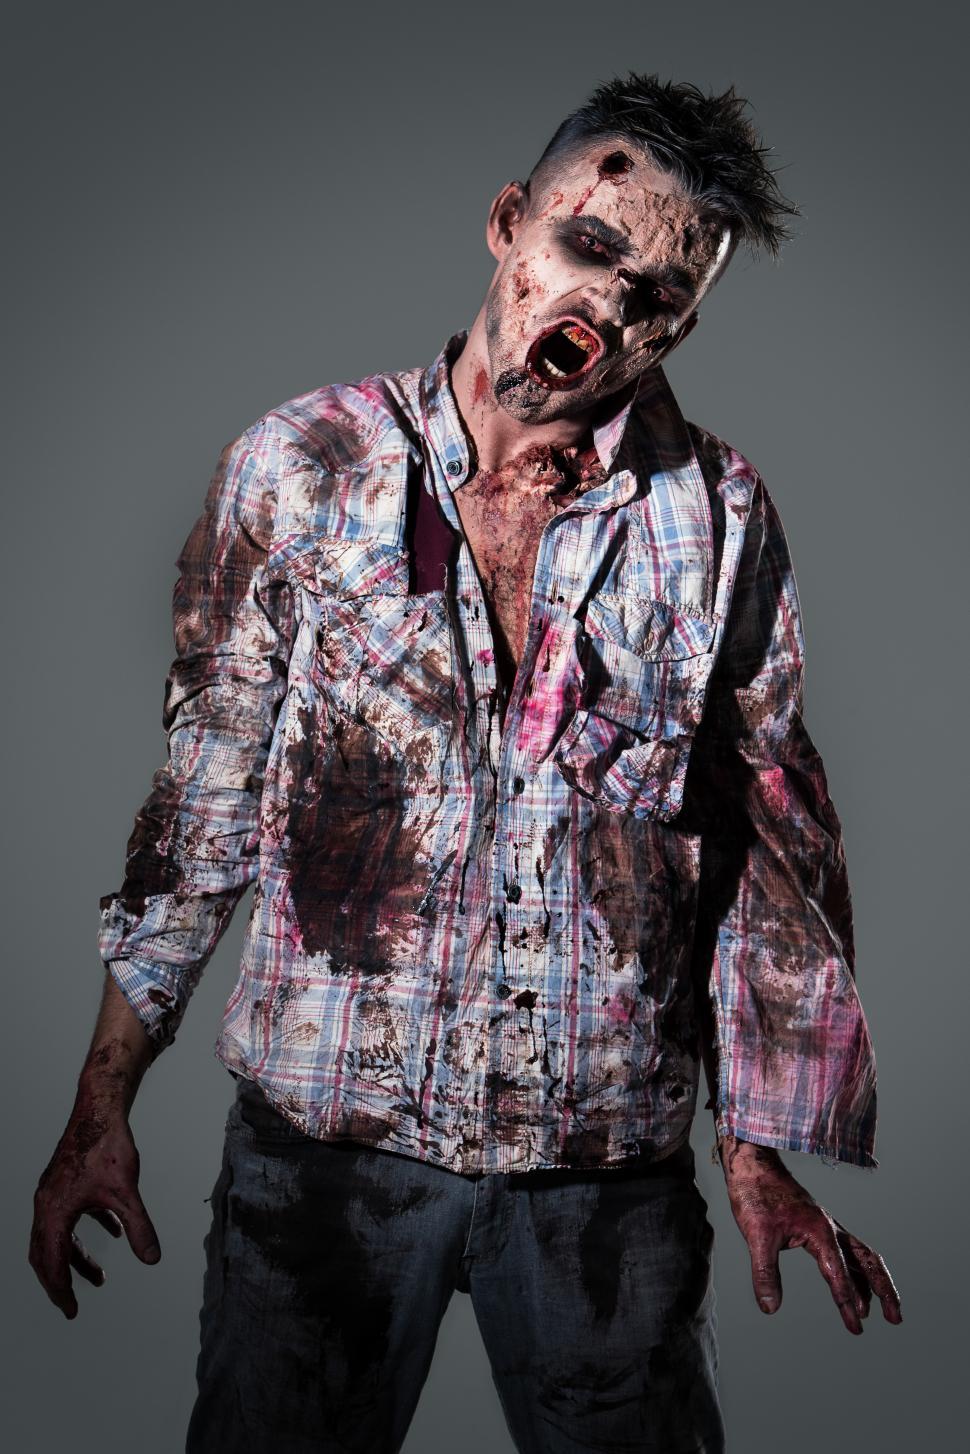 Free Image of Scary zombie cosplay 